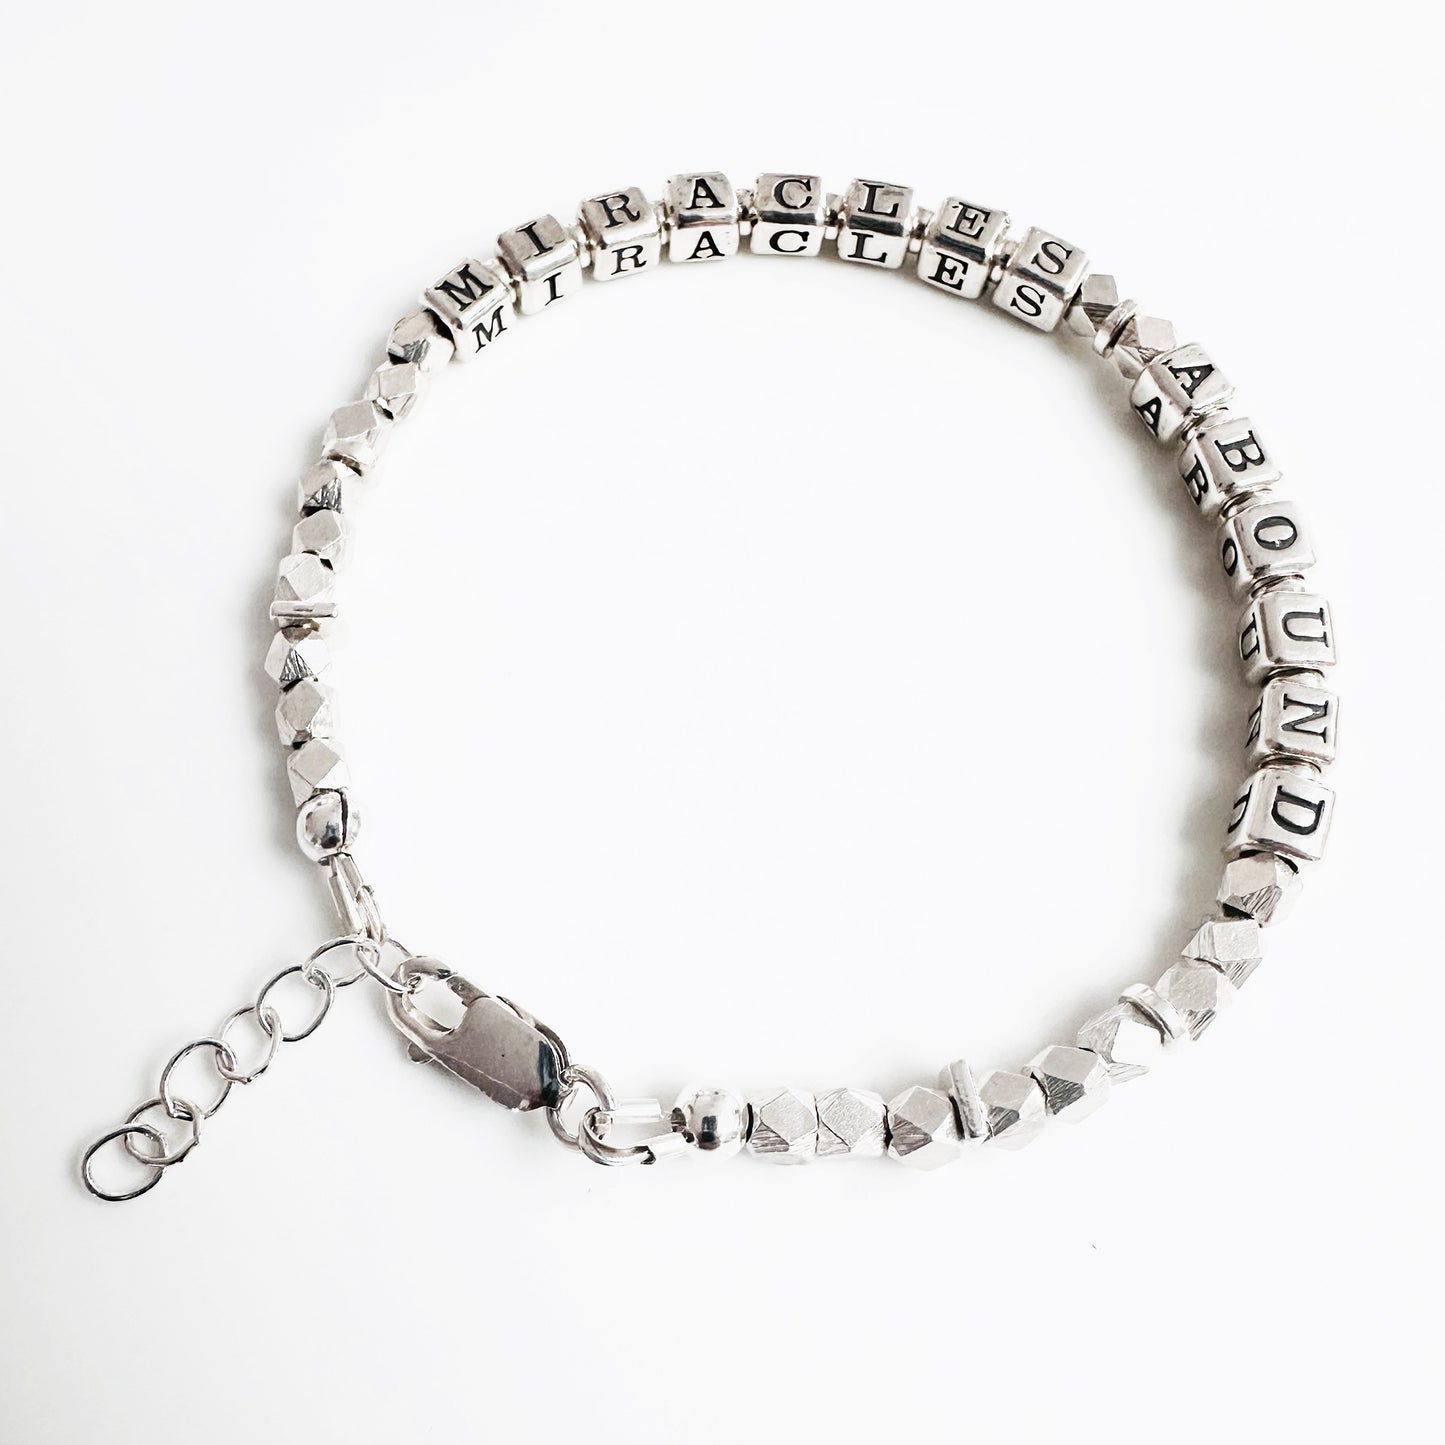 Sterling Silver bracelet spelling out the message "Miracles Abound" and has adjustable closure